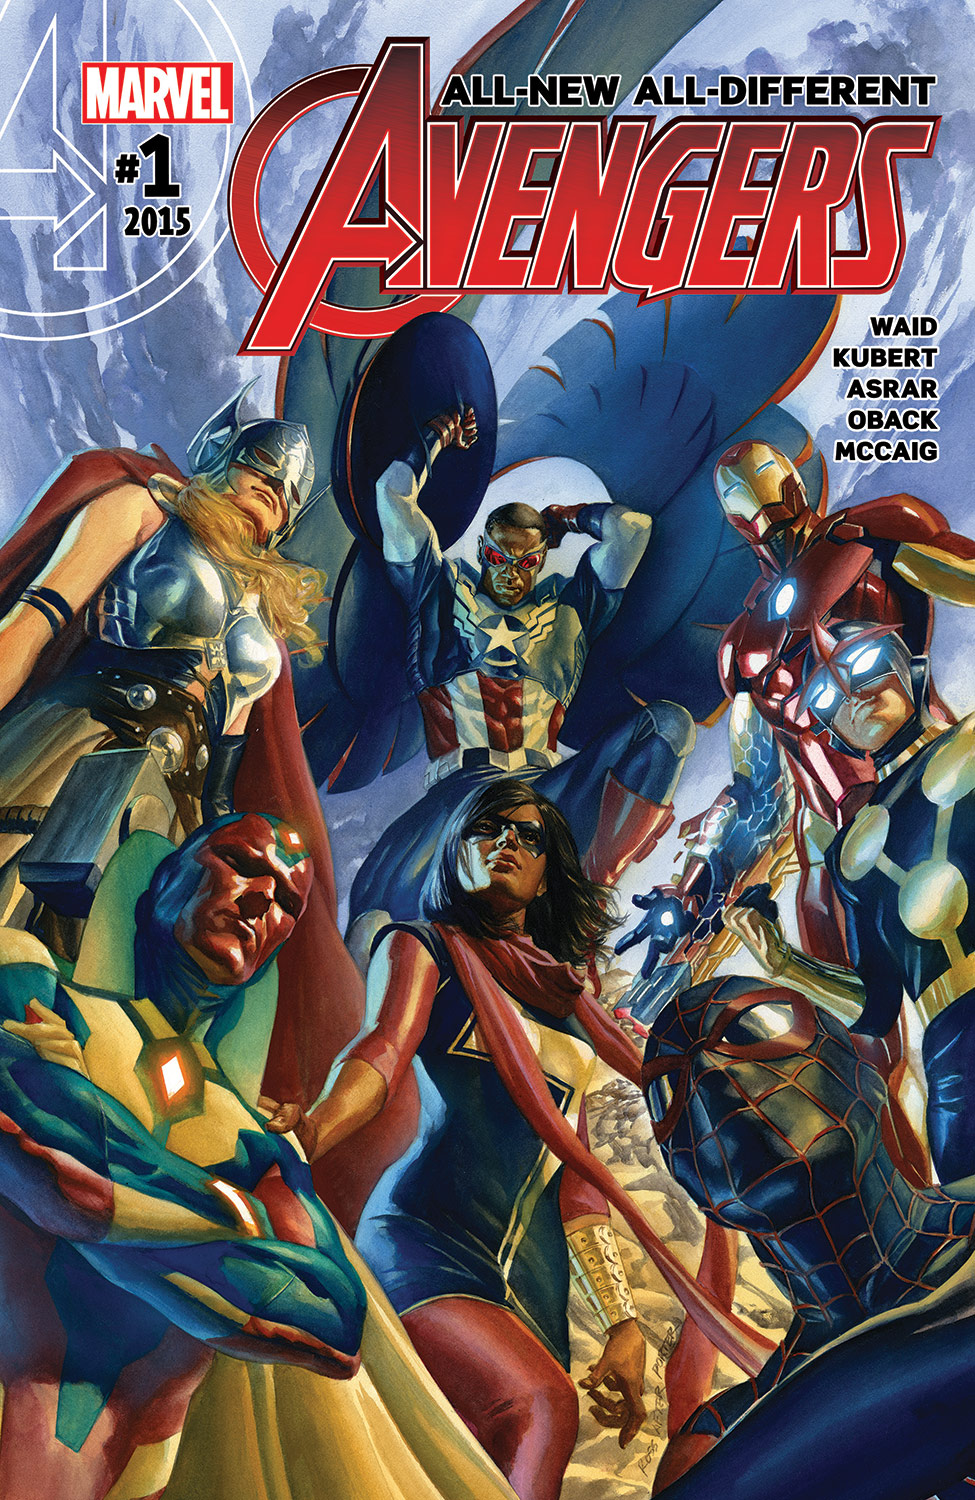 ALL NEW ALL DIFFERENT AVENGERS ANNUAL #1 Variant Cover by Alex Ross